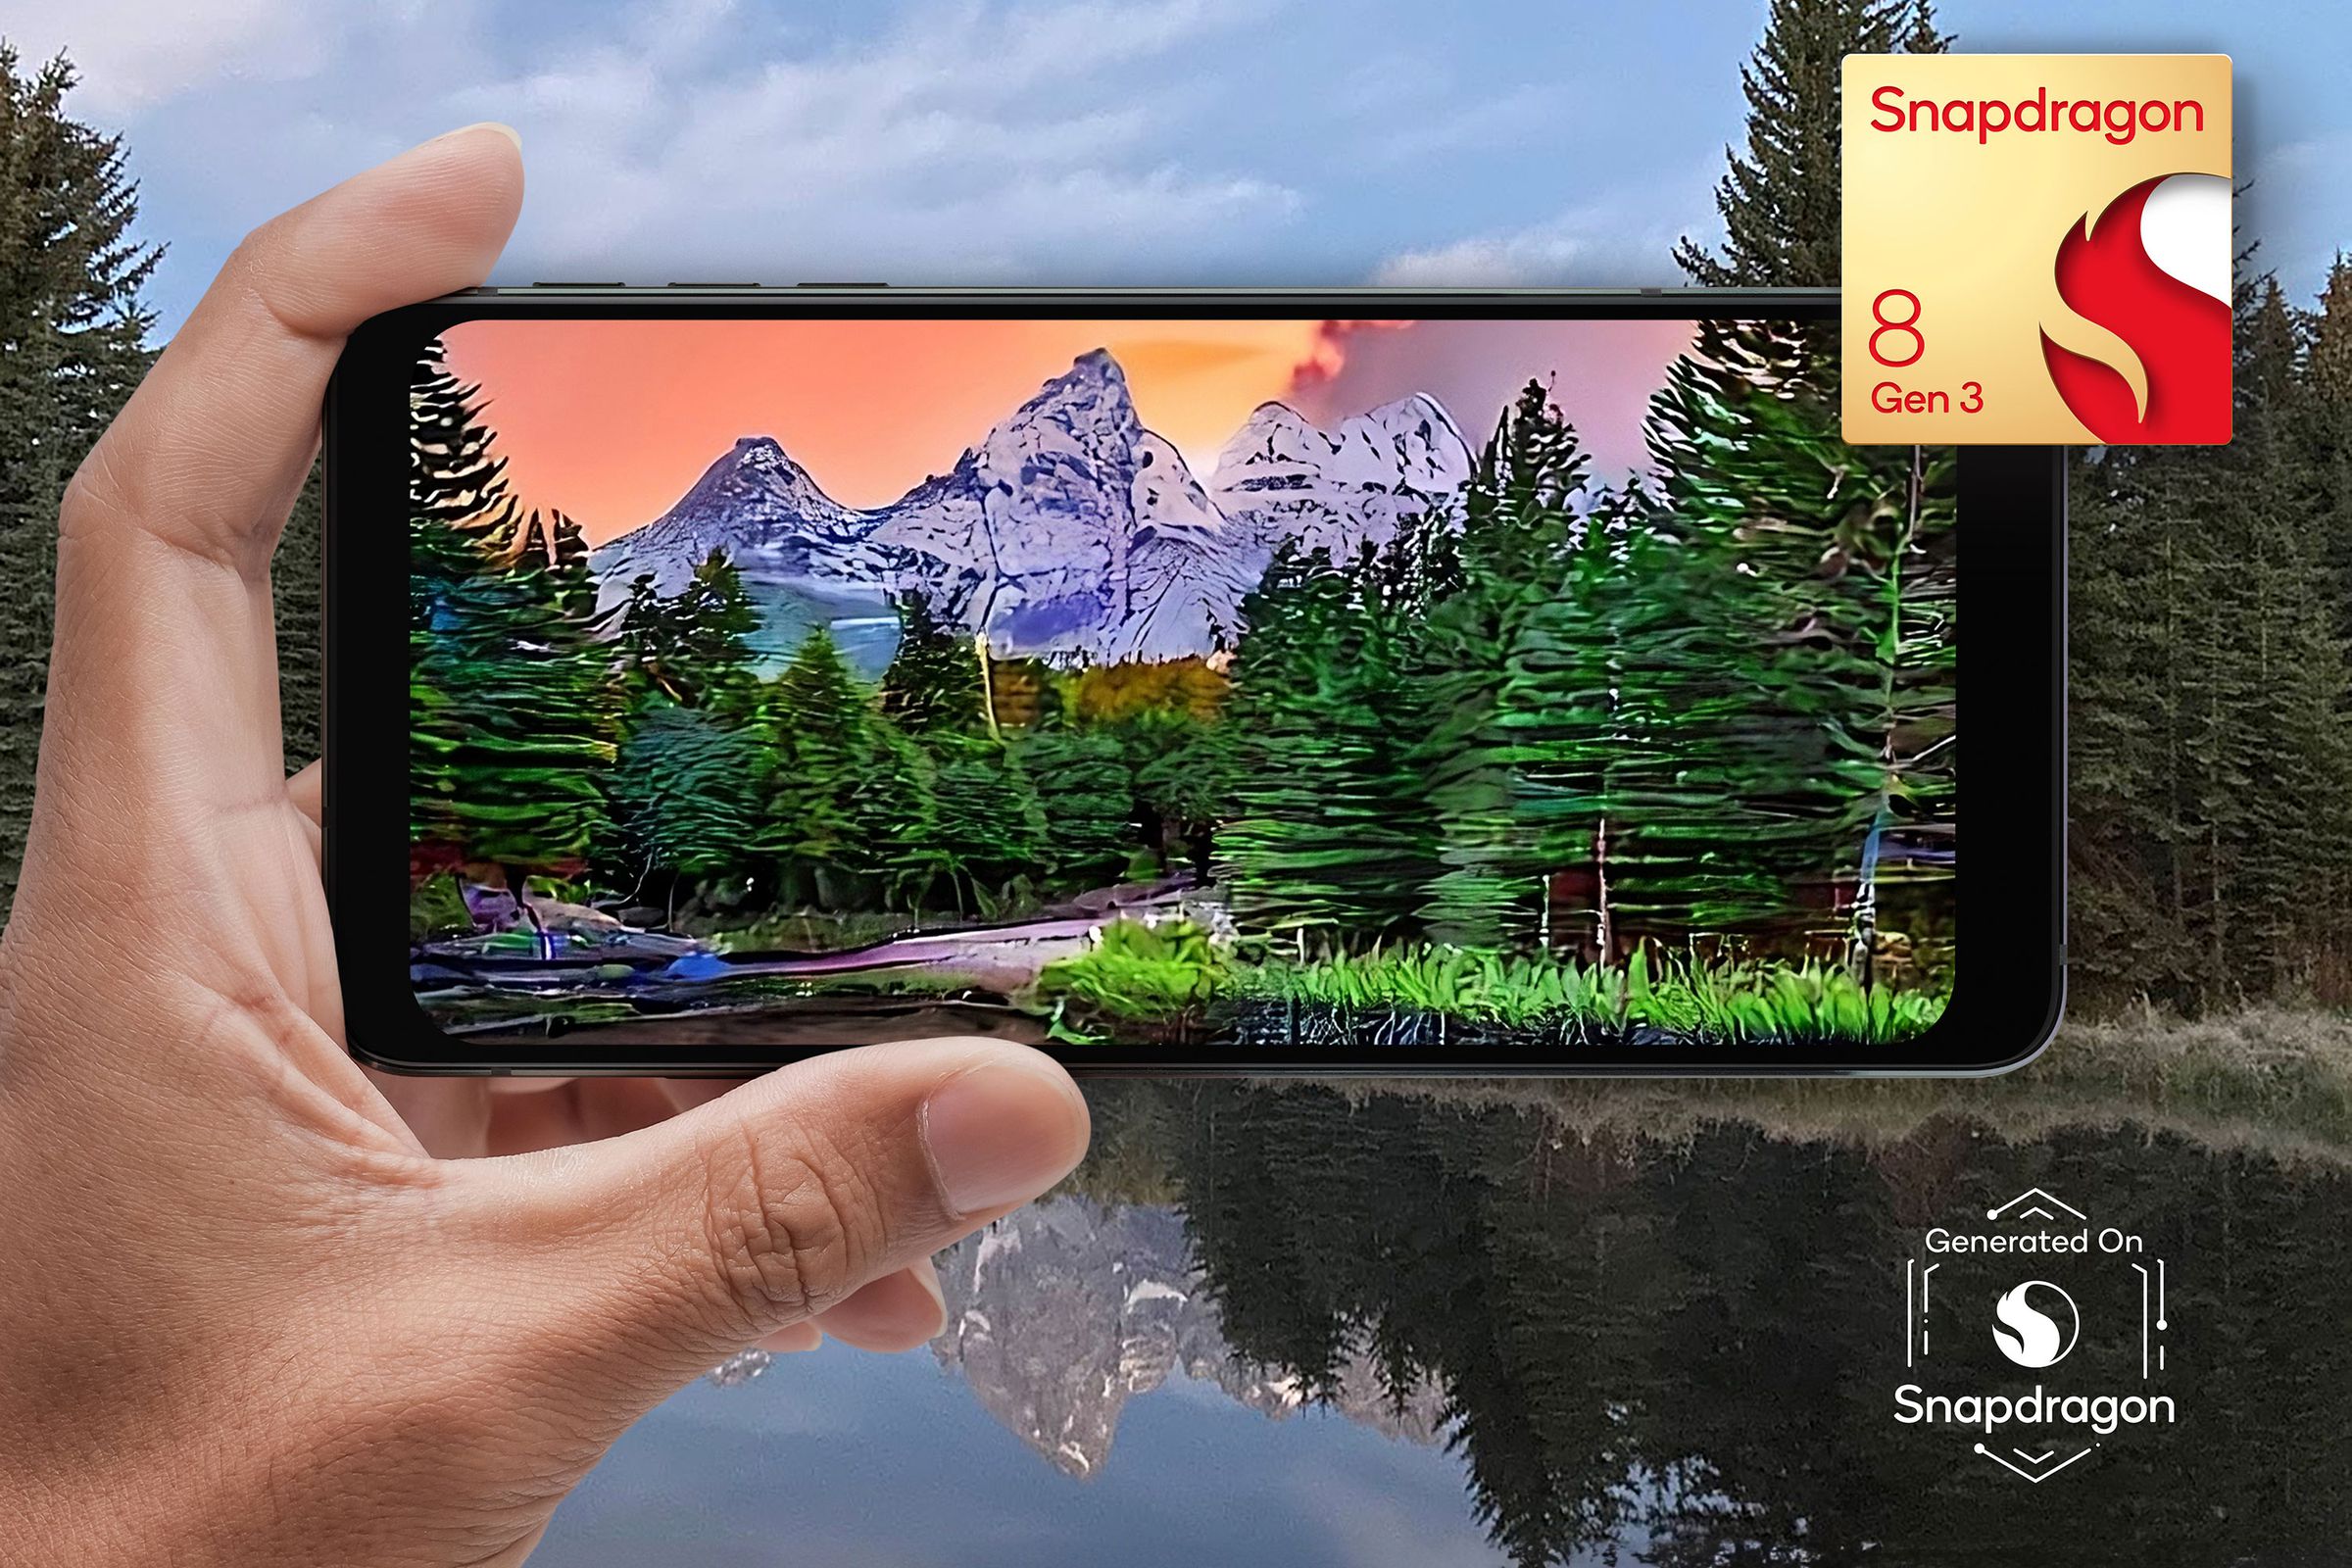 Rendering showing a phone taking a photo of a scene with trees and mountains.